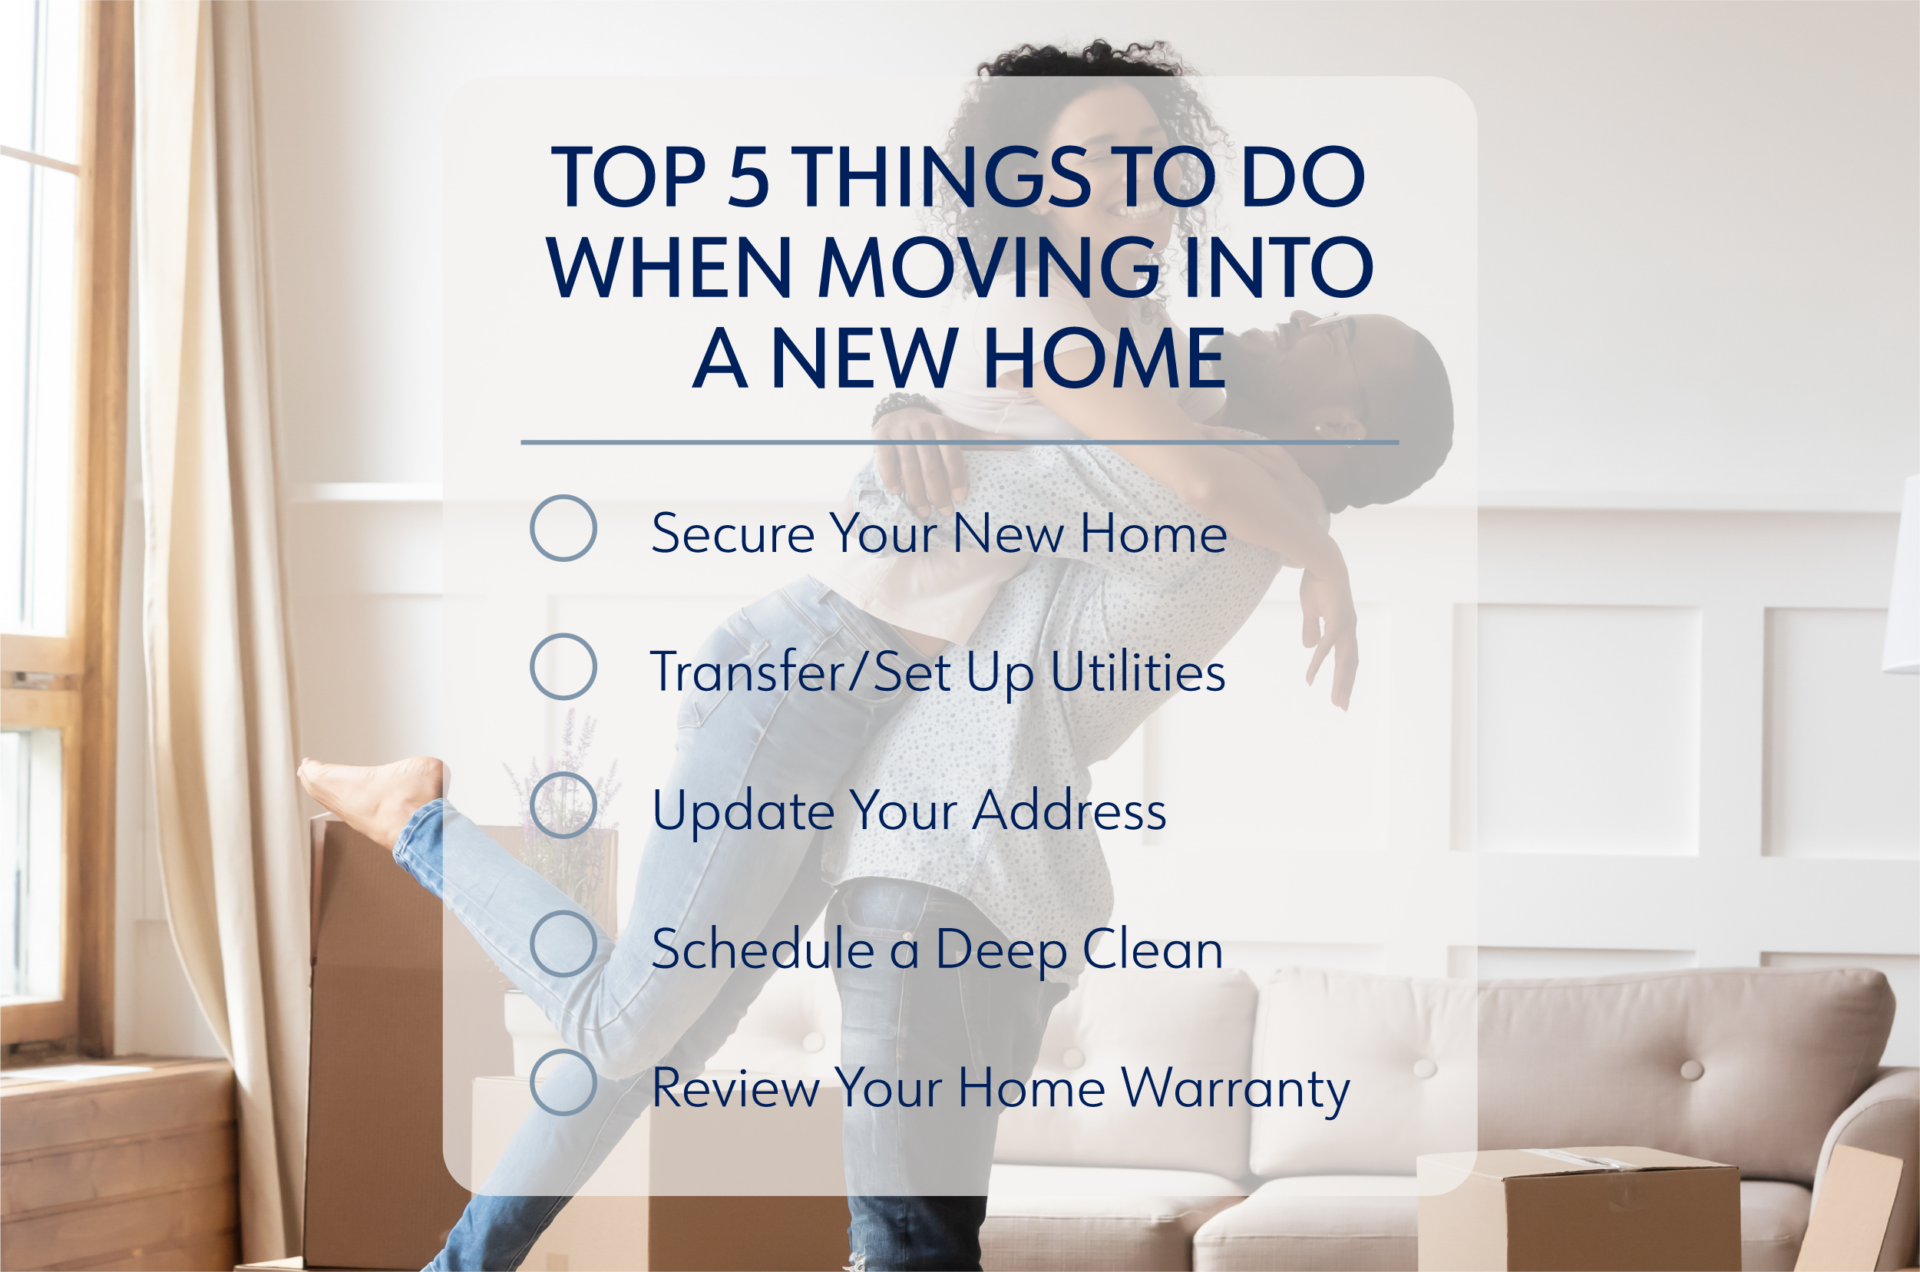 https://www.highlandsmortgage.com/wp-content/uploads/New-Home_Move-In-Checklist-Blog-Image.png